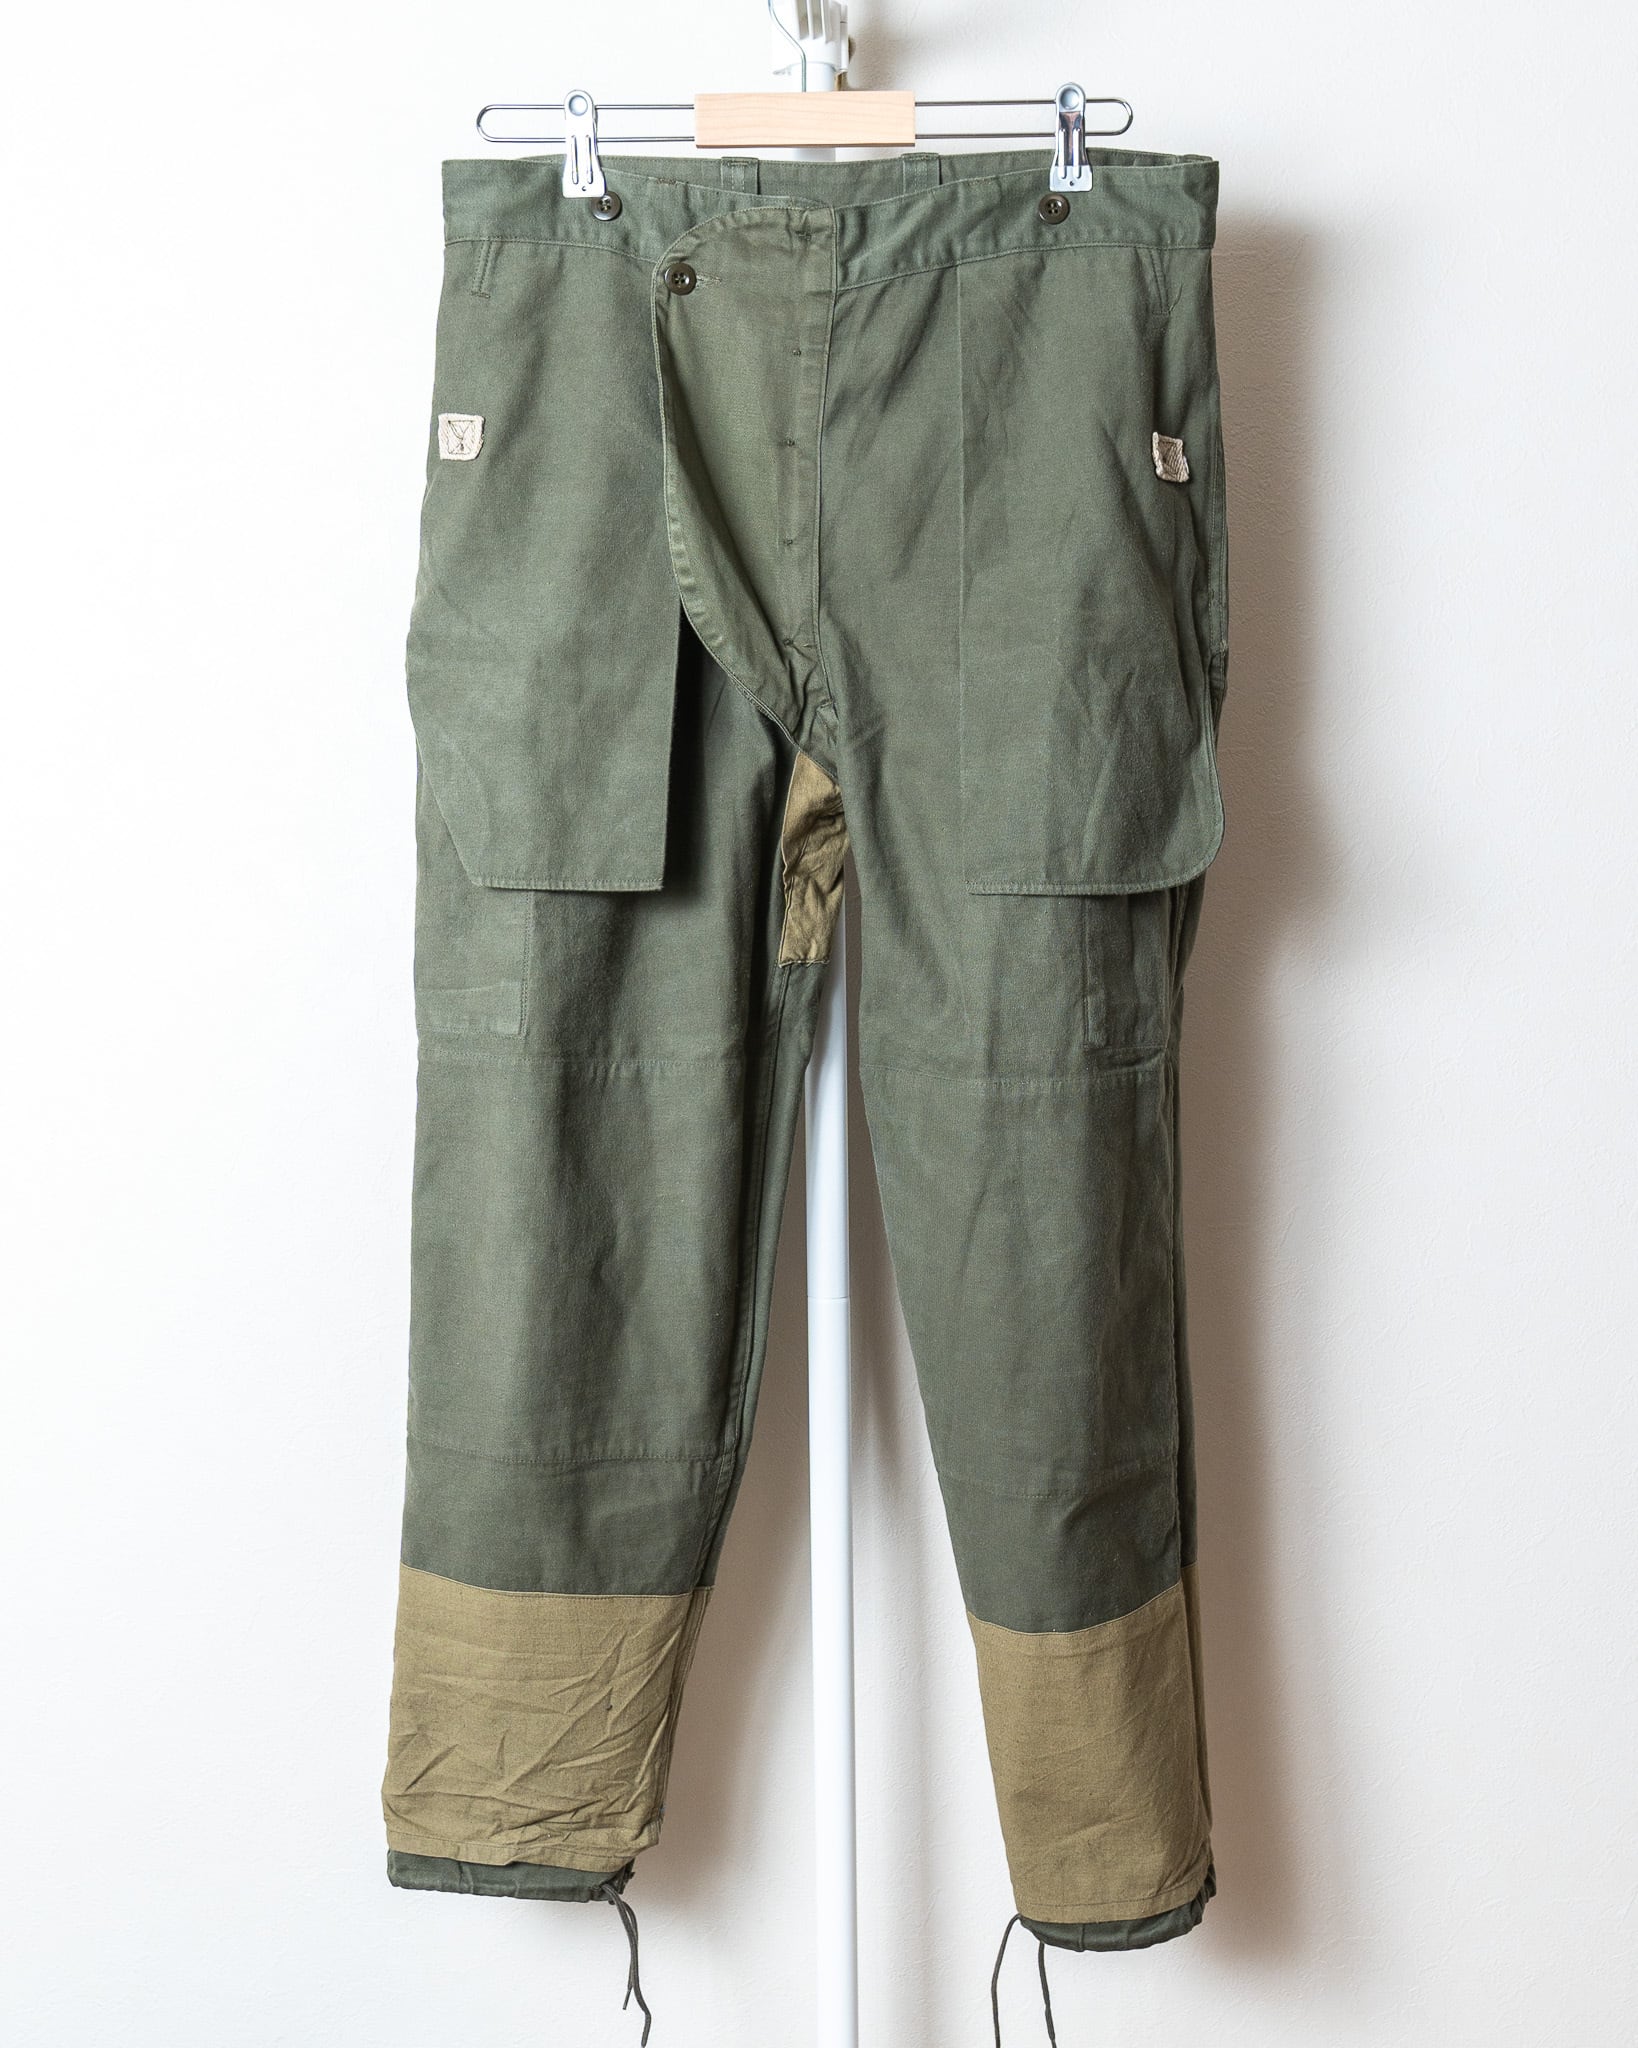 【AランクUsed】French Army M-64 Field Trousers フランス軍 実物 ...